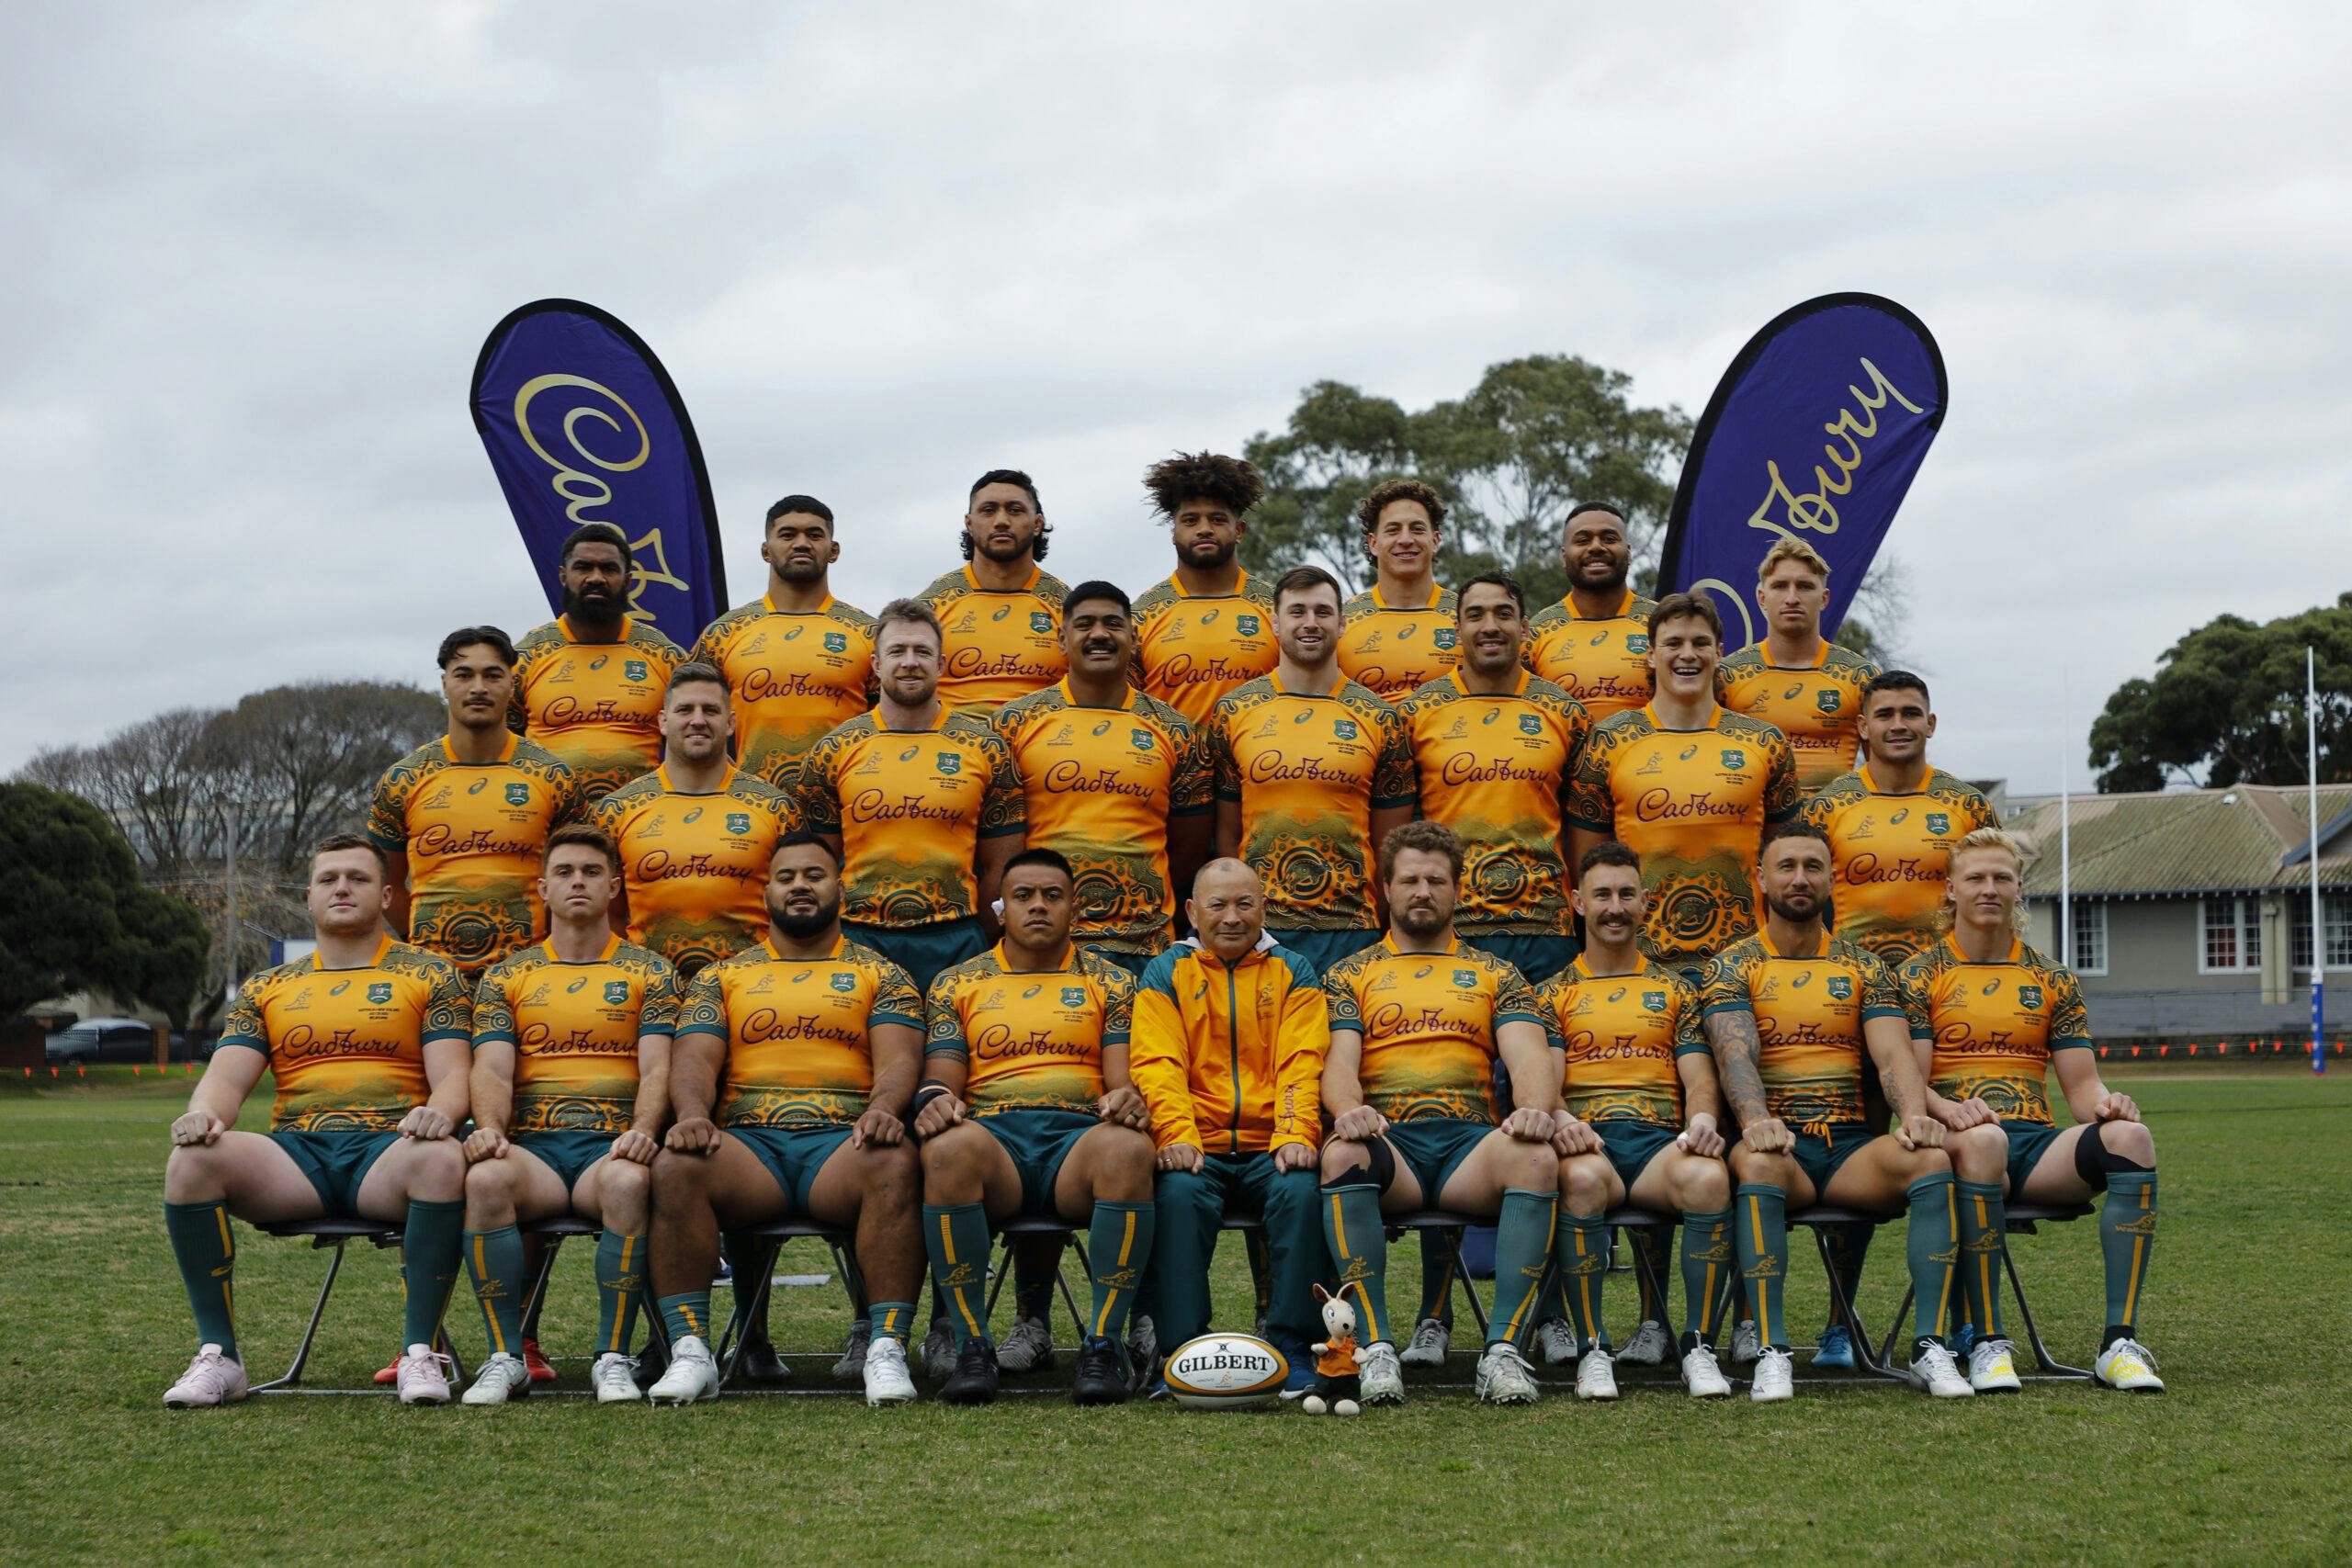 The Australian Rugby Union team the Wallabies are coming to Darwin